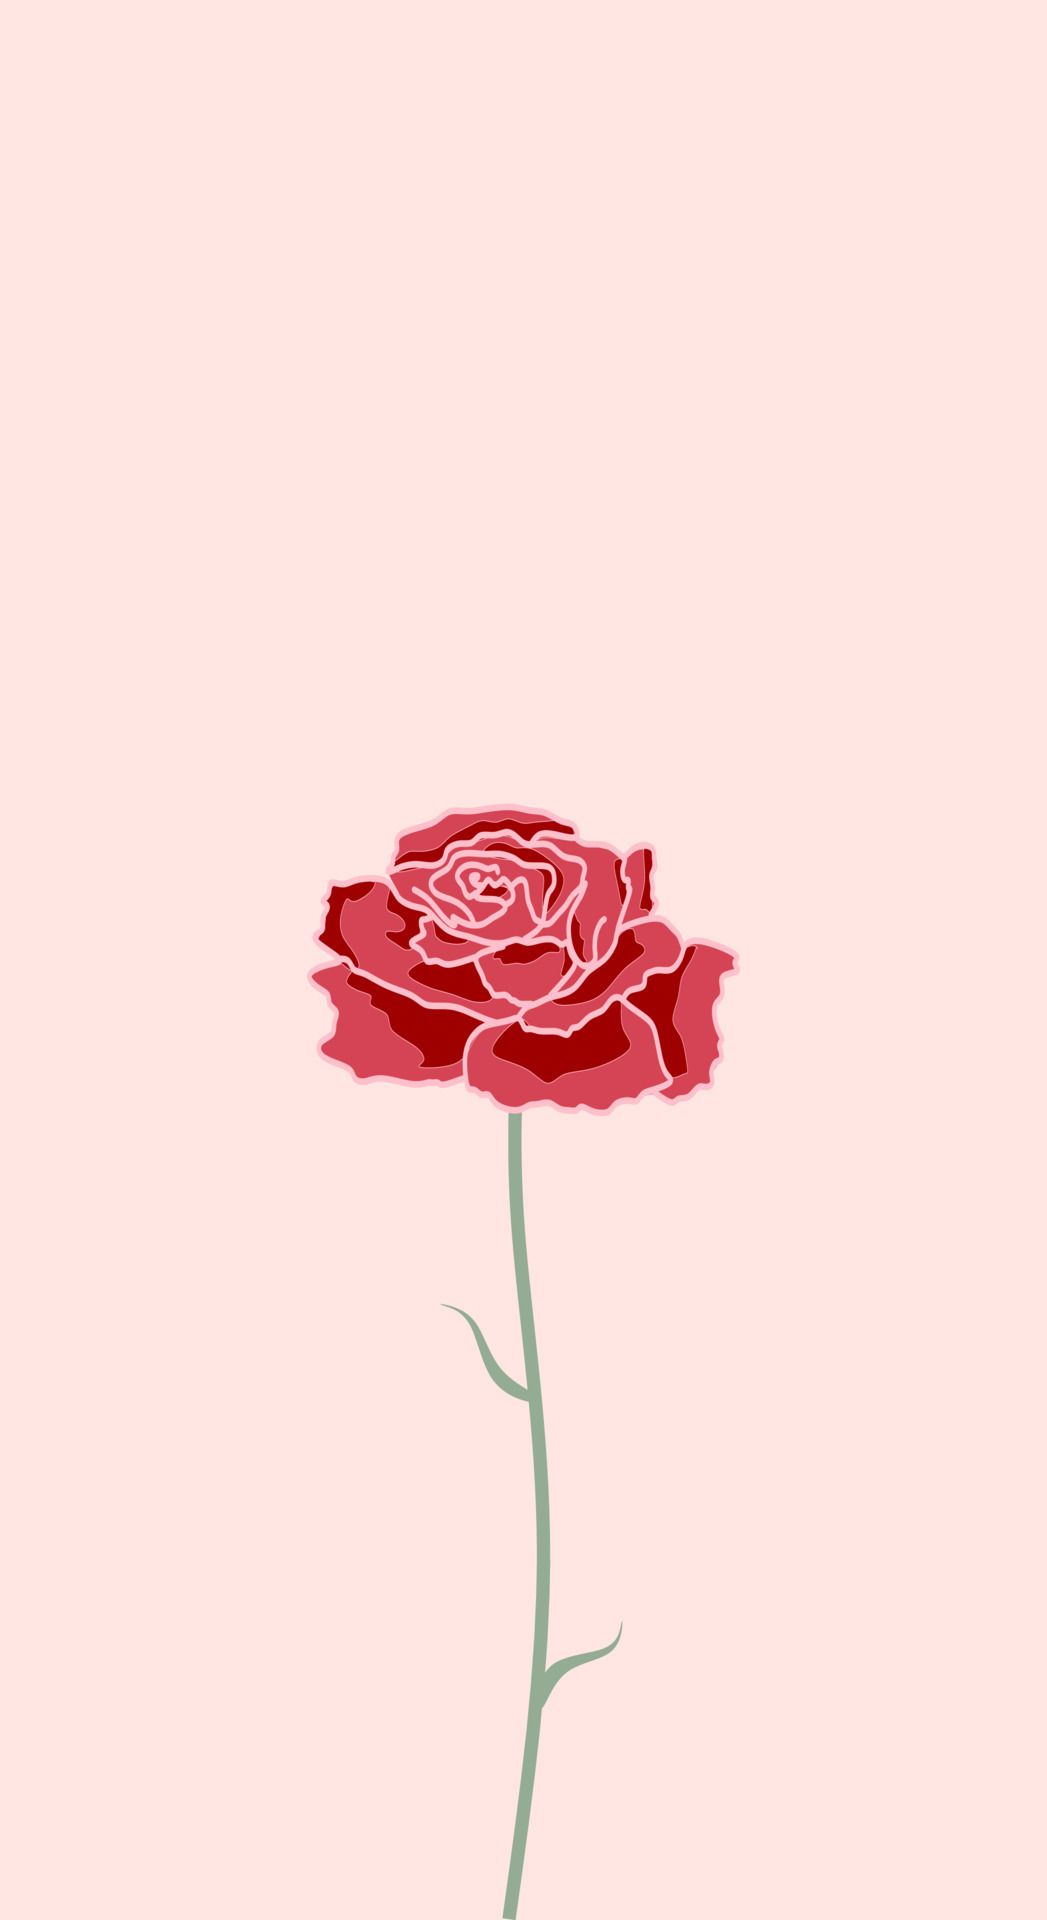 Beautiful summer vector illustration in flat style with design rose flower. Romantic aesthetic natural plant background. Banner for mobile phone screen saver theme, lock screen and wallpaper. Vector Art